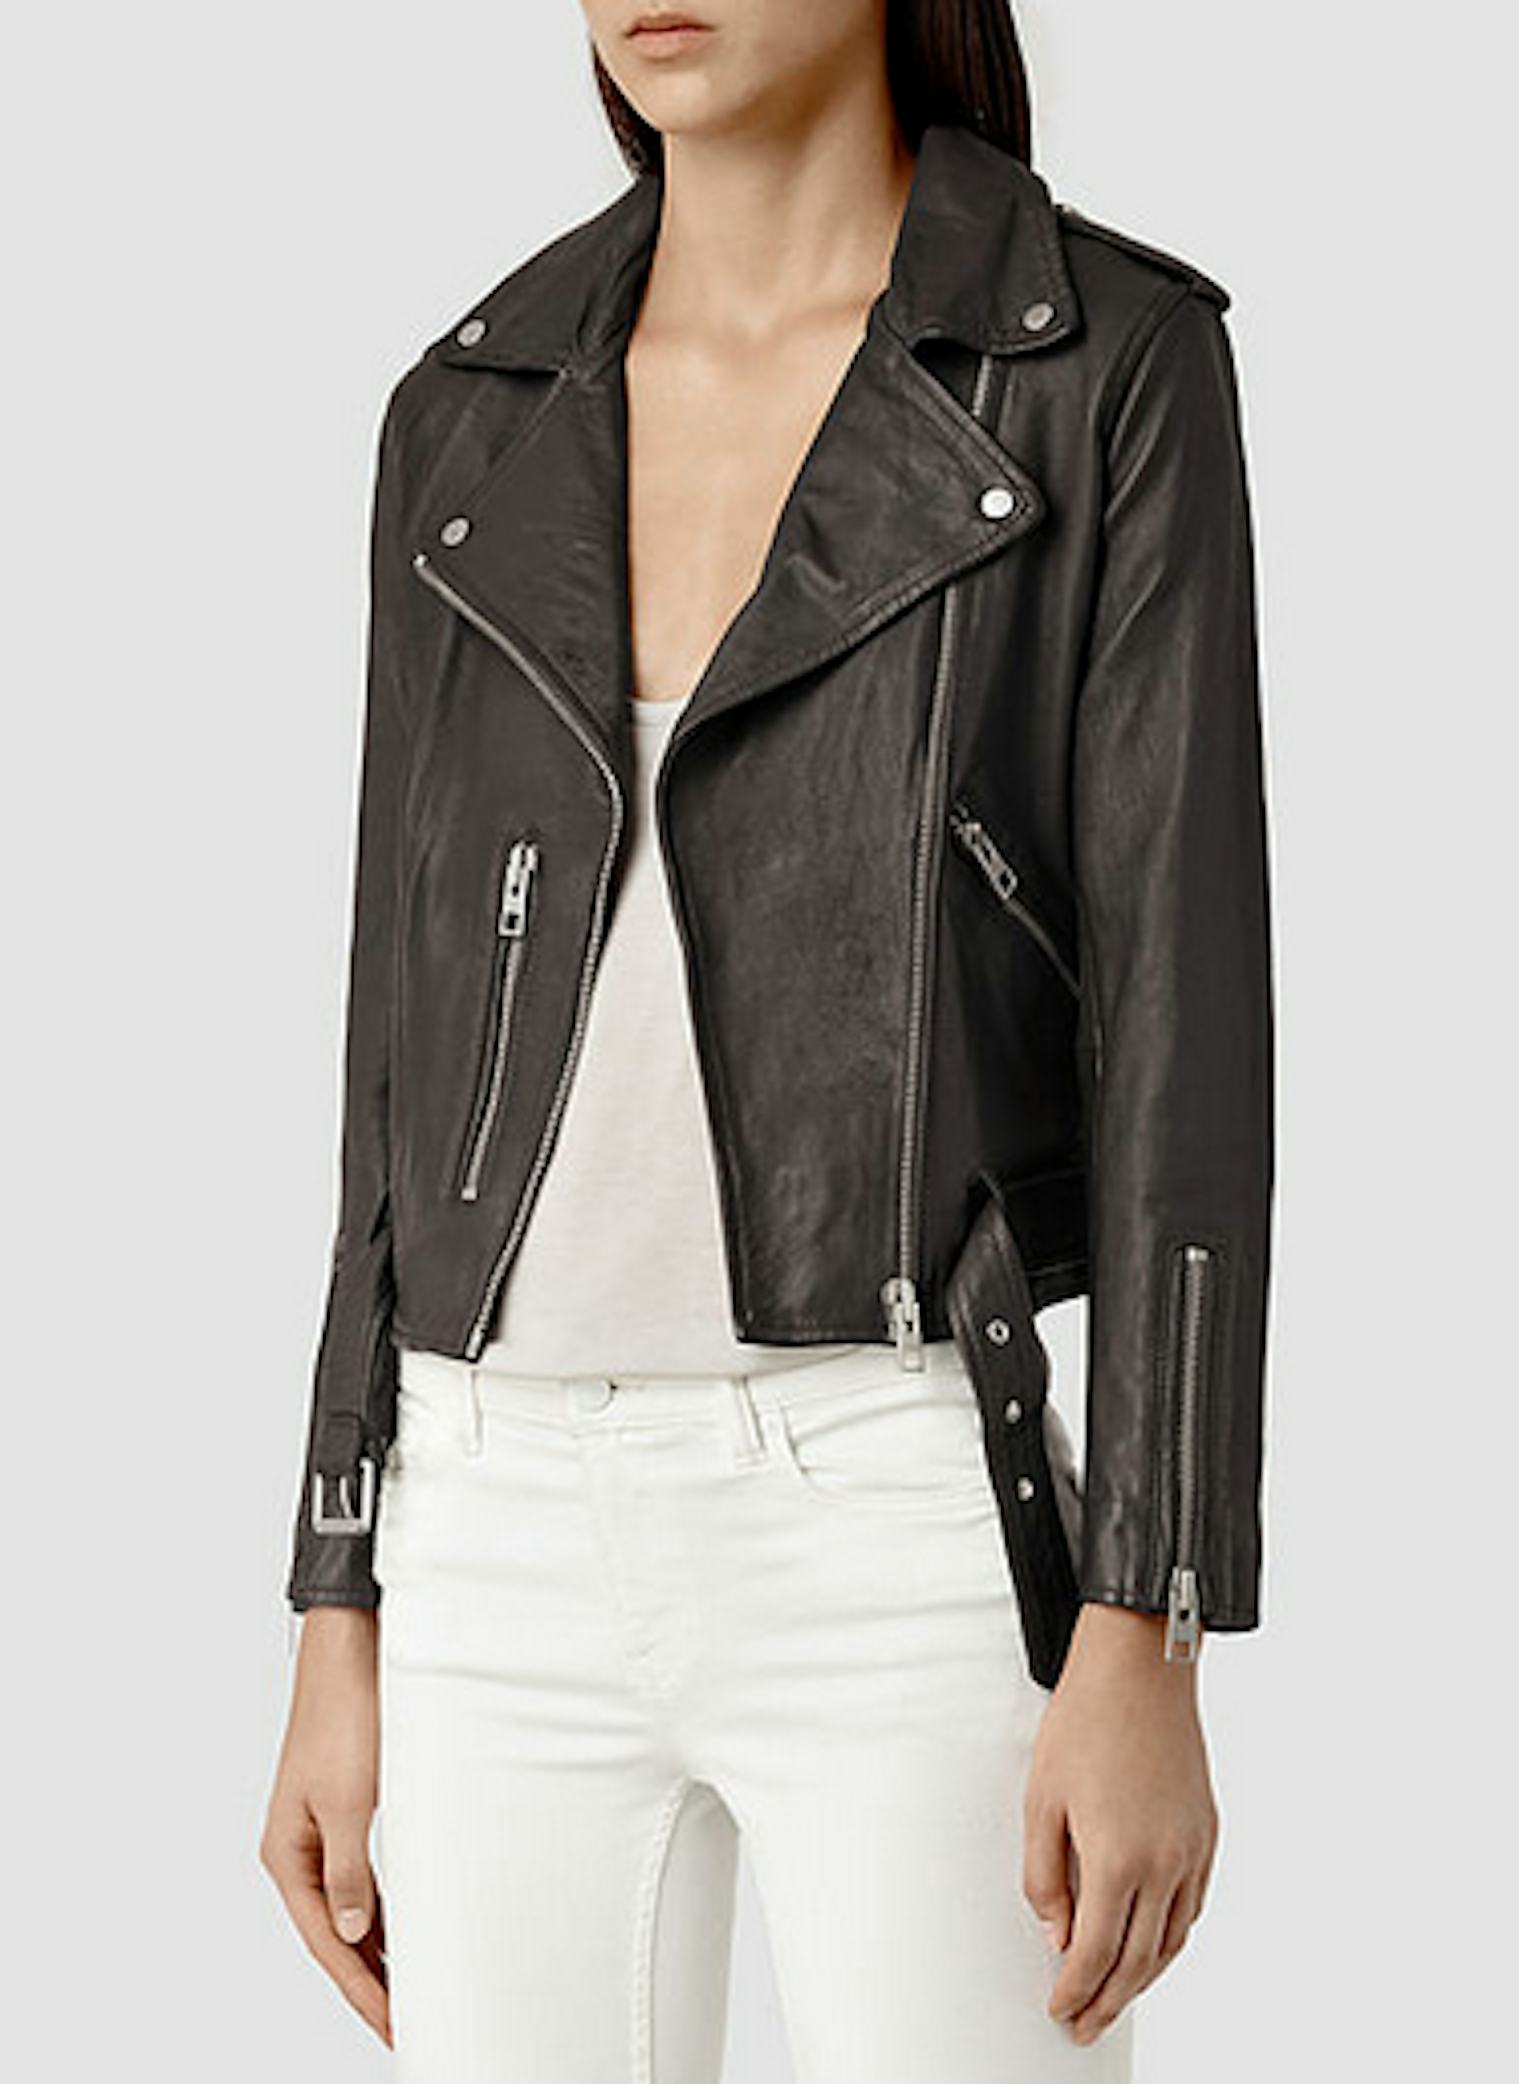 11 Fall Leather Jackets That'll Keep You Warm, But Make You Look Cool